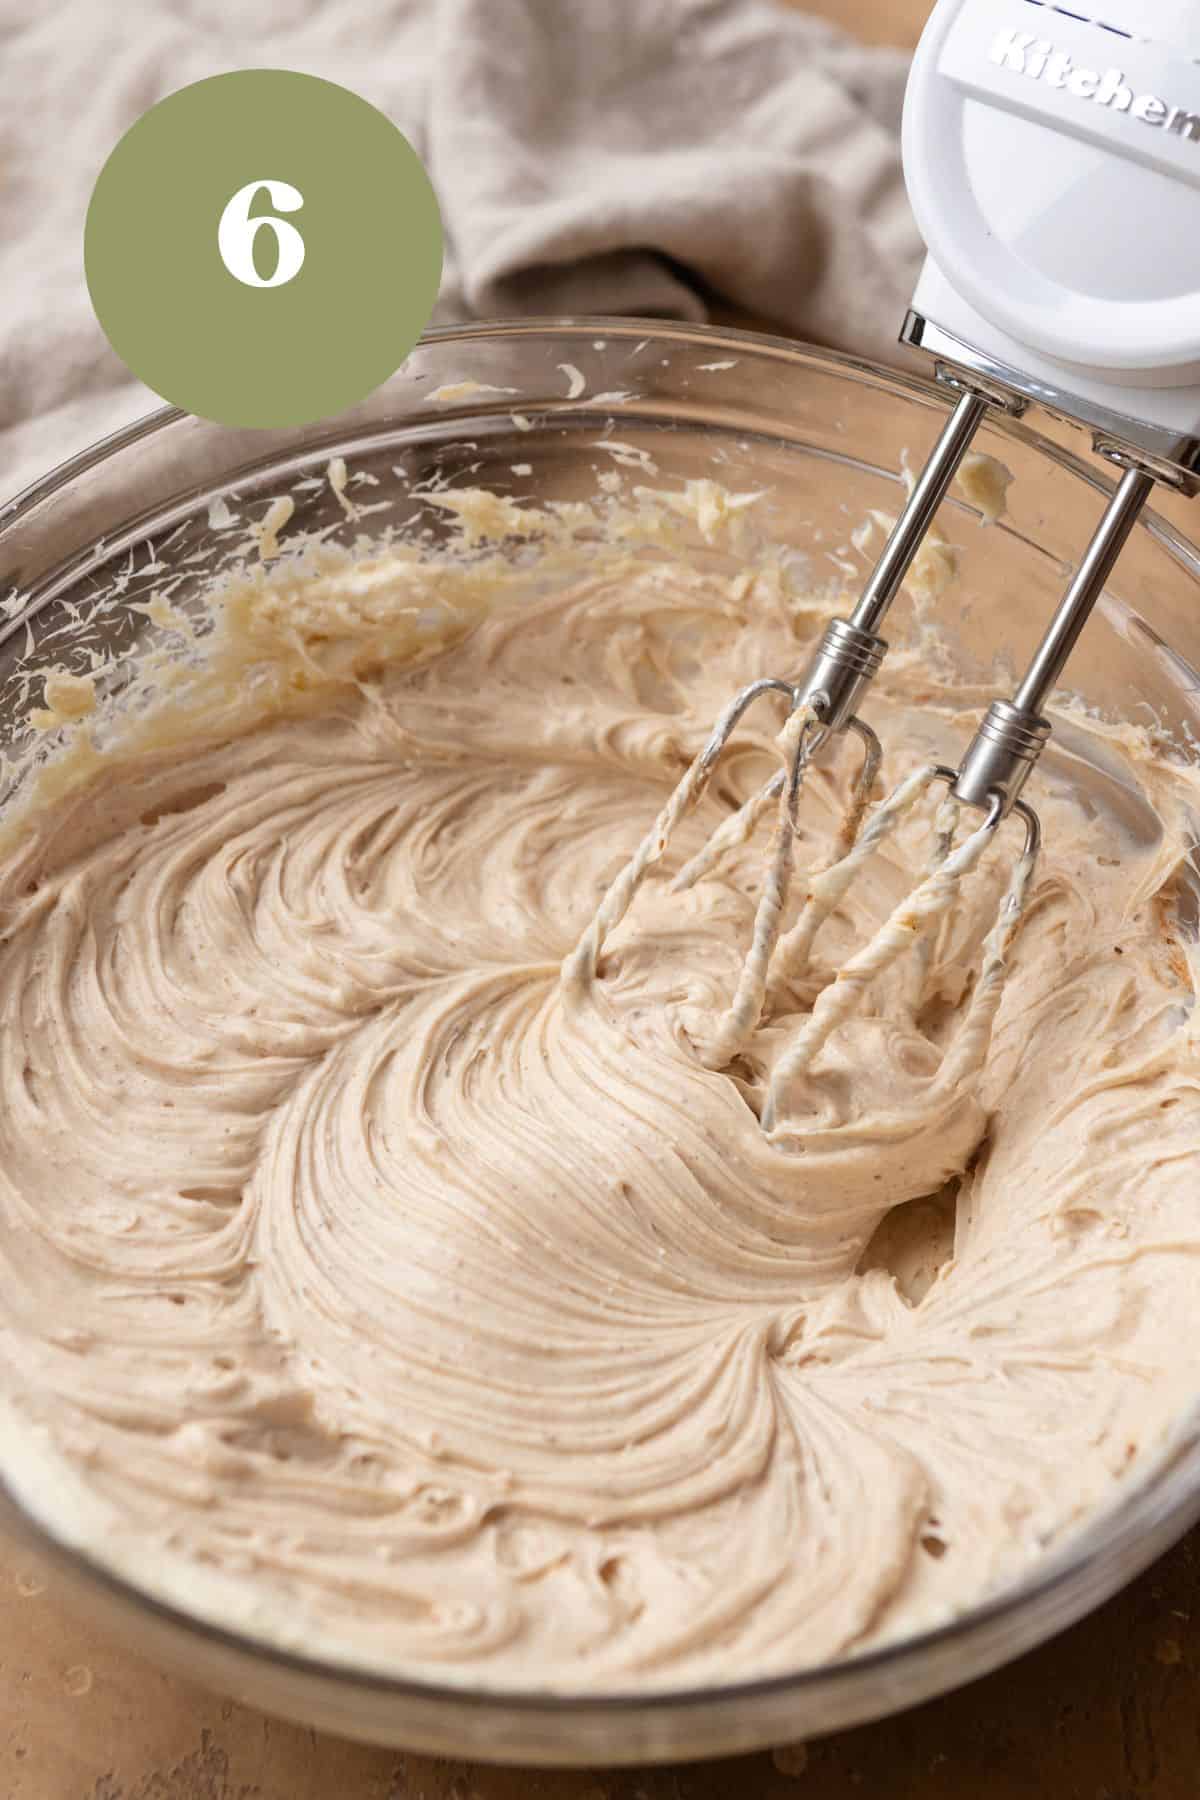 Cream cheese and spices being mixed in a large bowl.